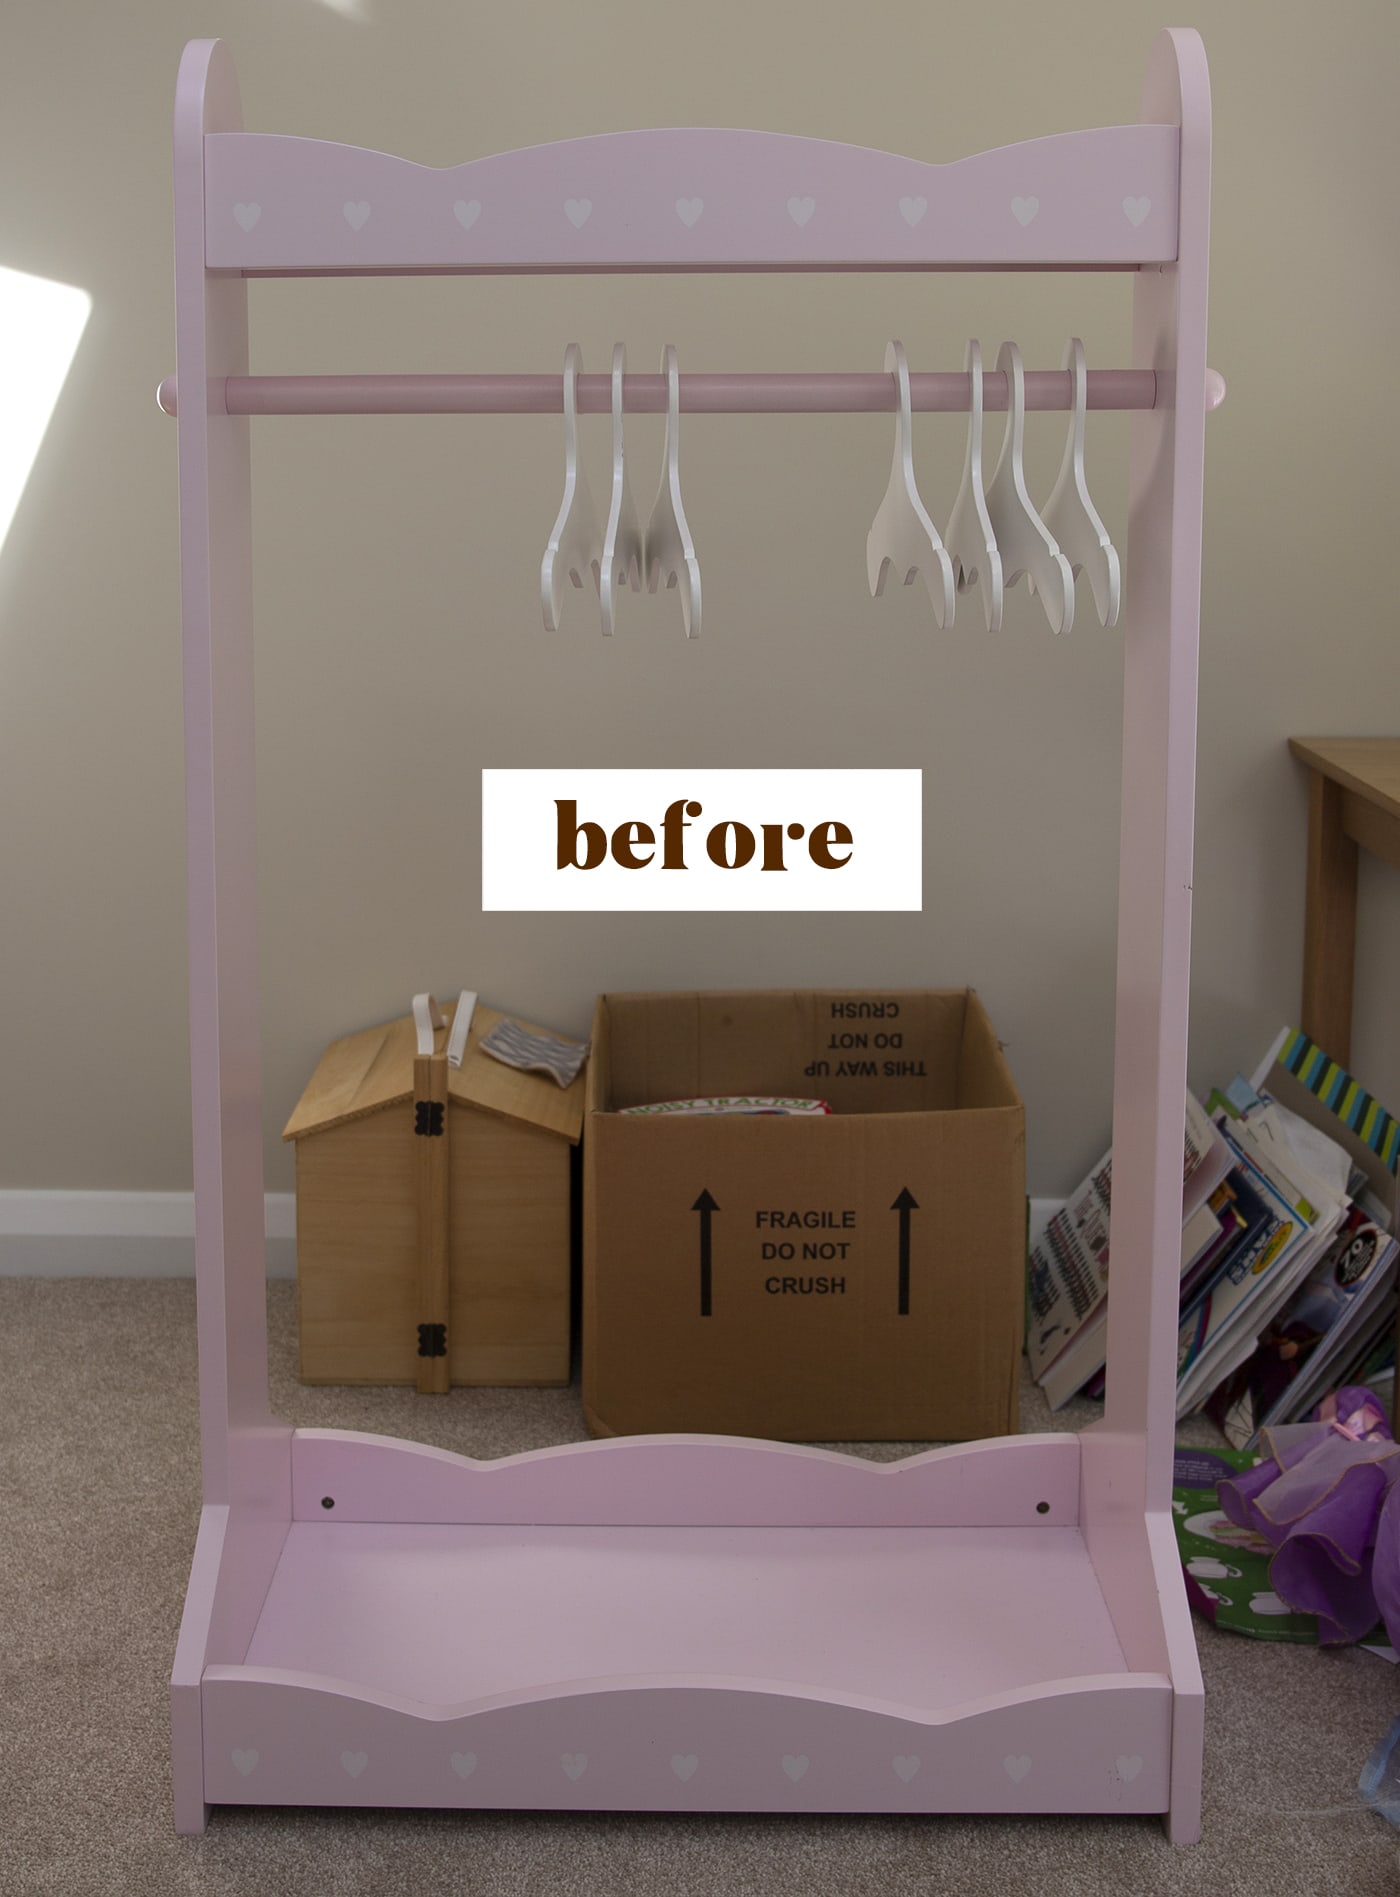 Kid’s Clothes Hanger Upcycle